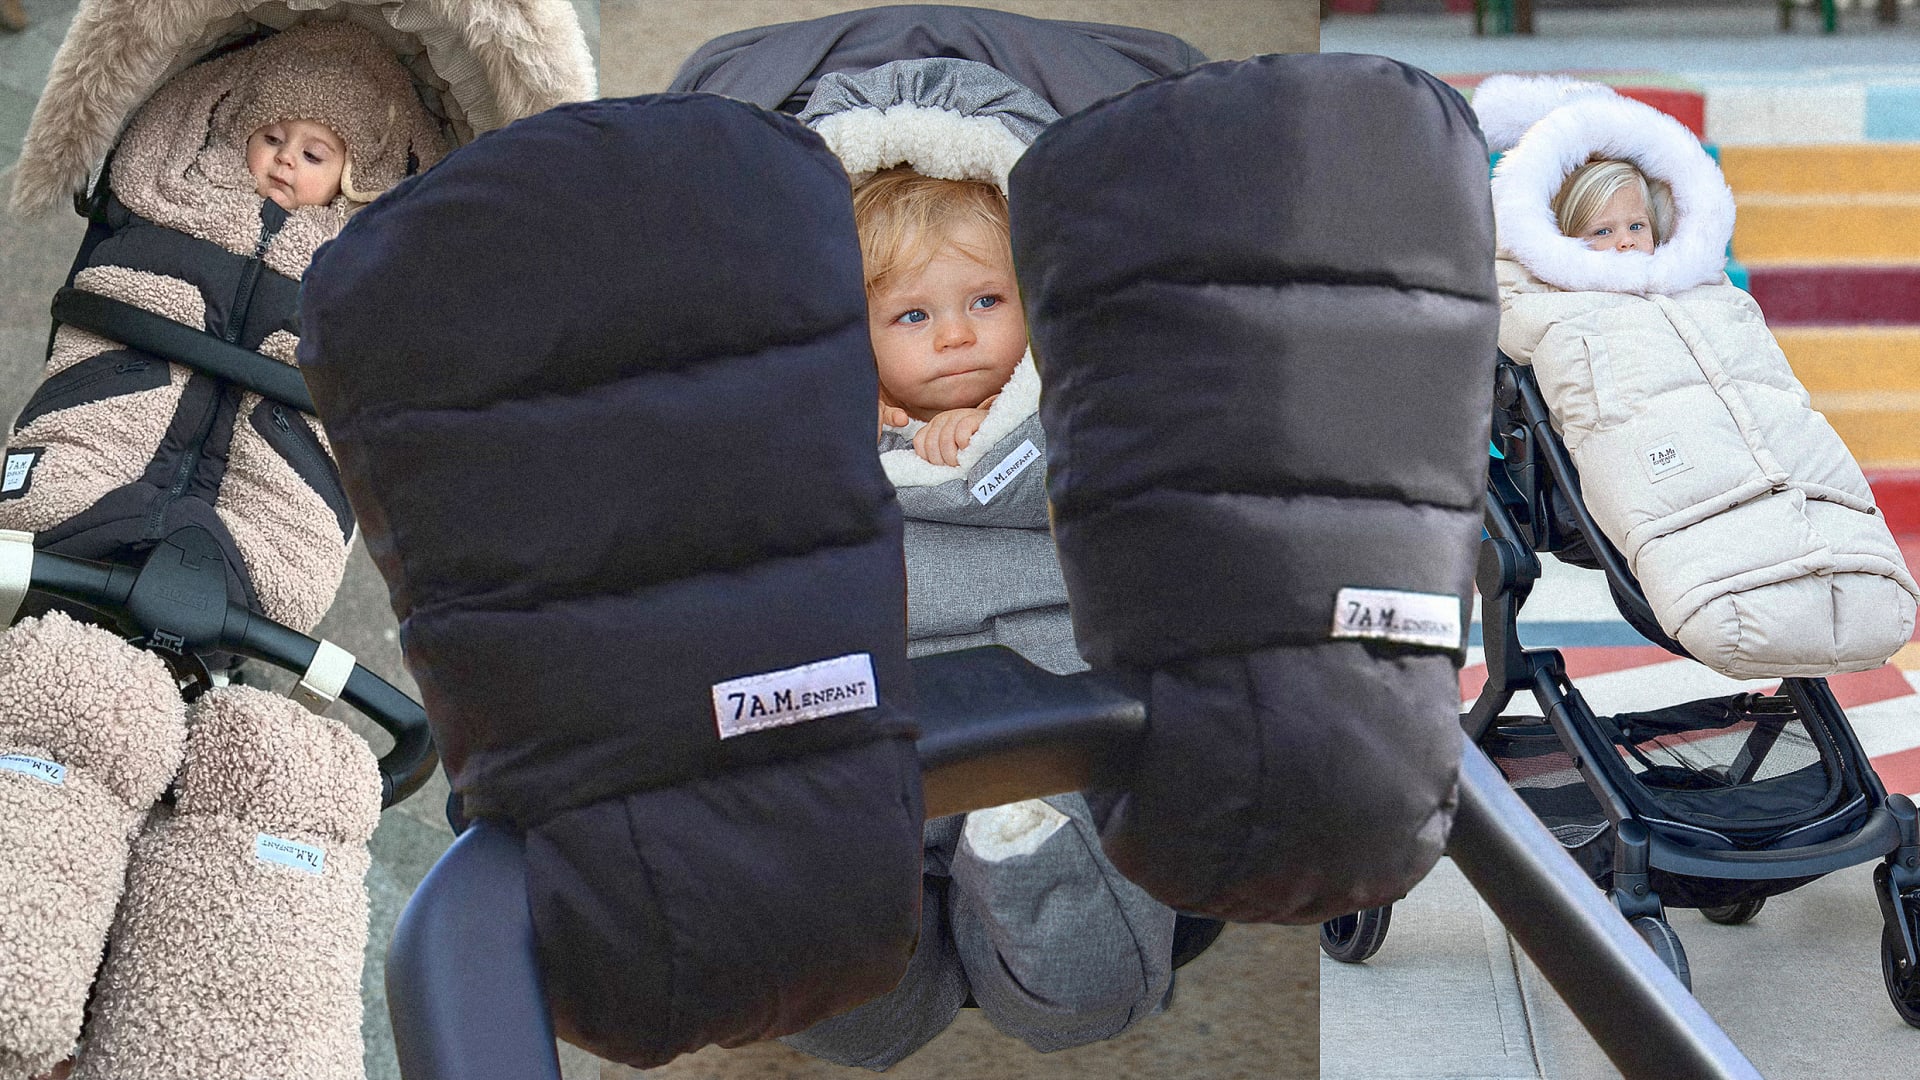 An ingenious design feature helped 7 AM Enfant sell 1 million stroller gloves